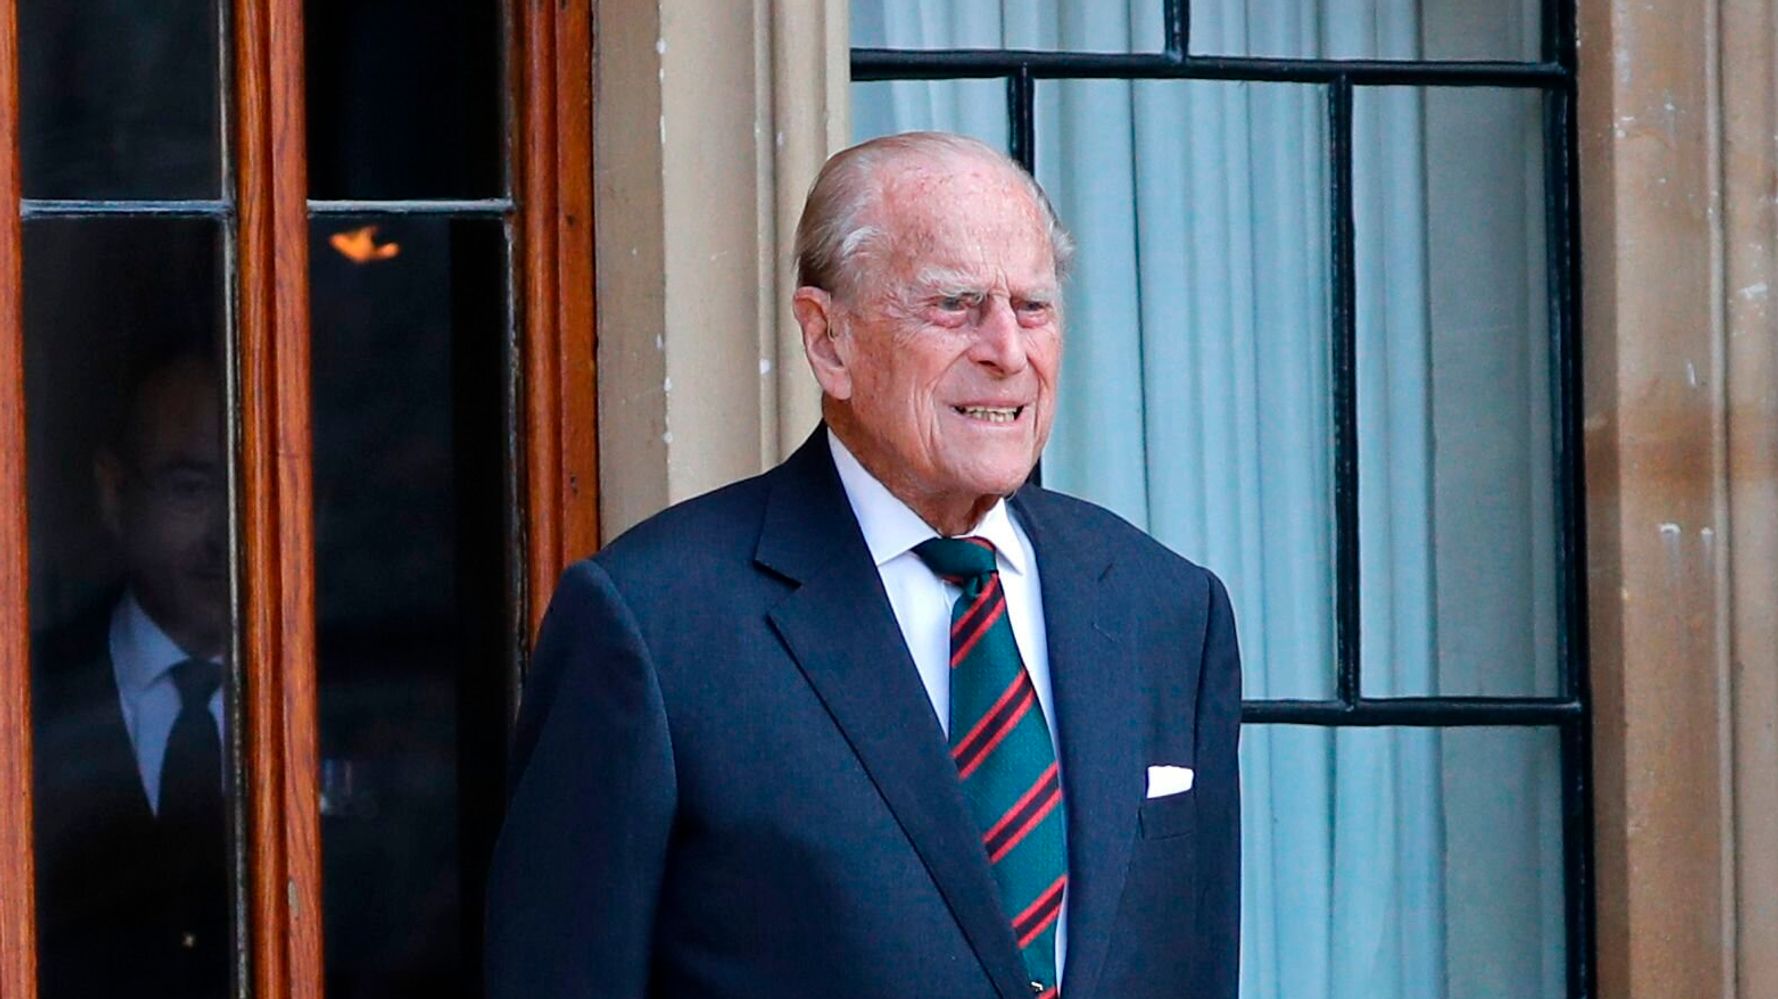 Buckingham Palace reveals the cause of Prince Philip’s hospitalization